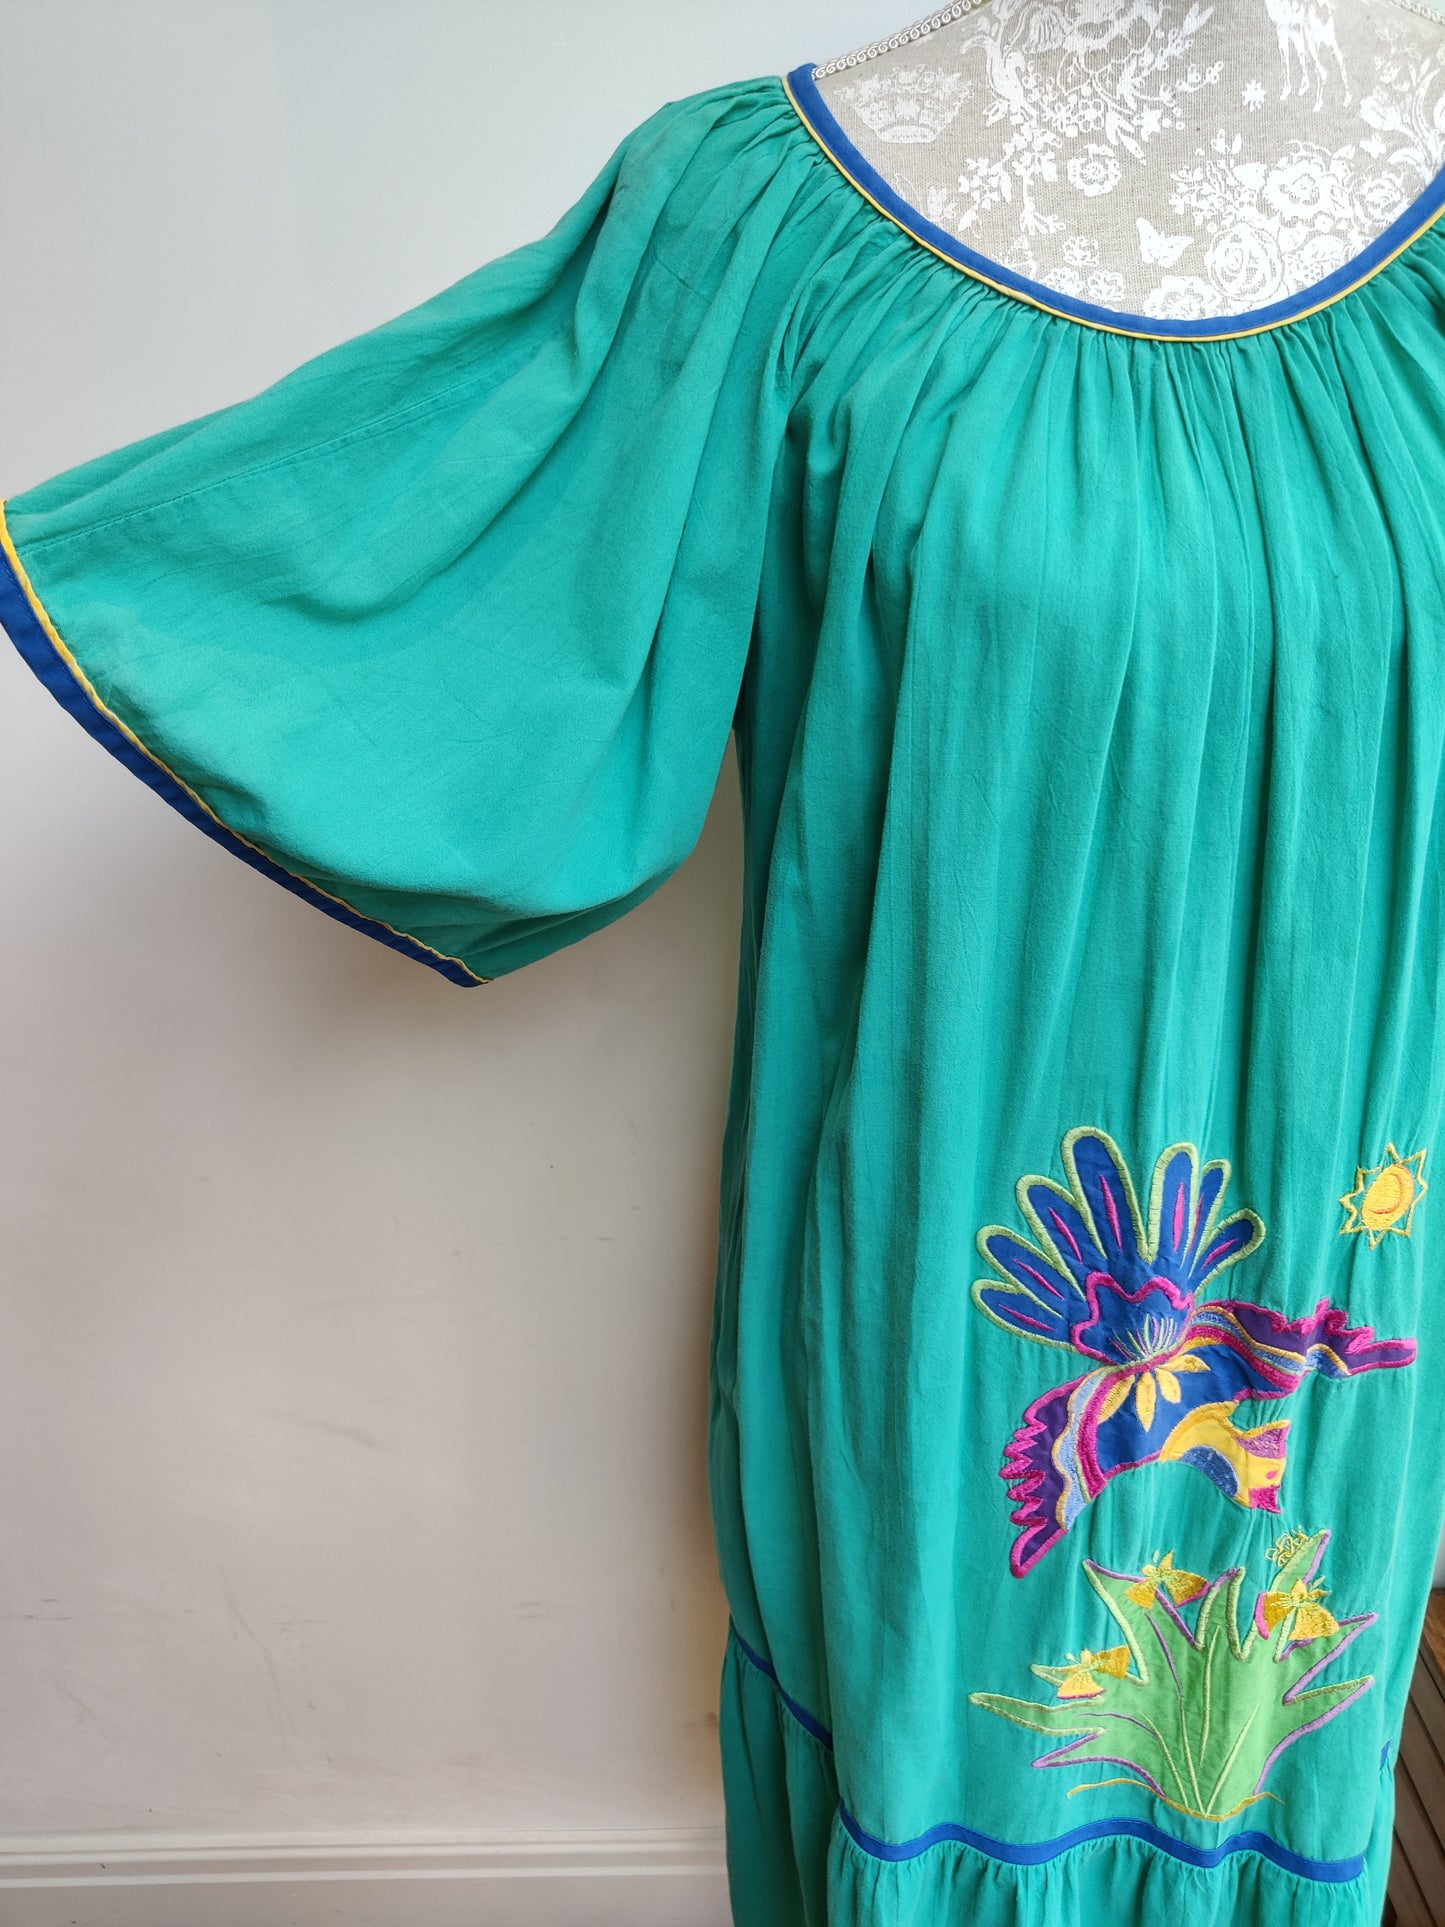 Embroidered 80s fun summer dress